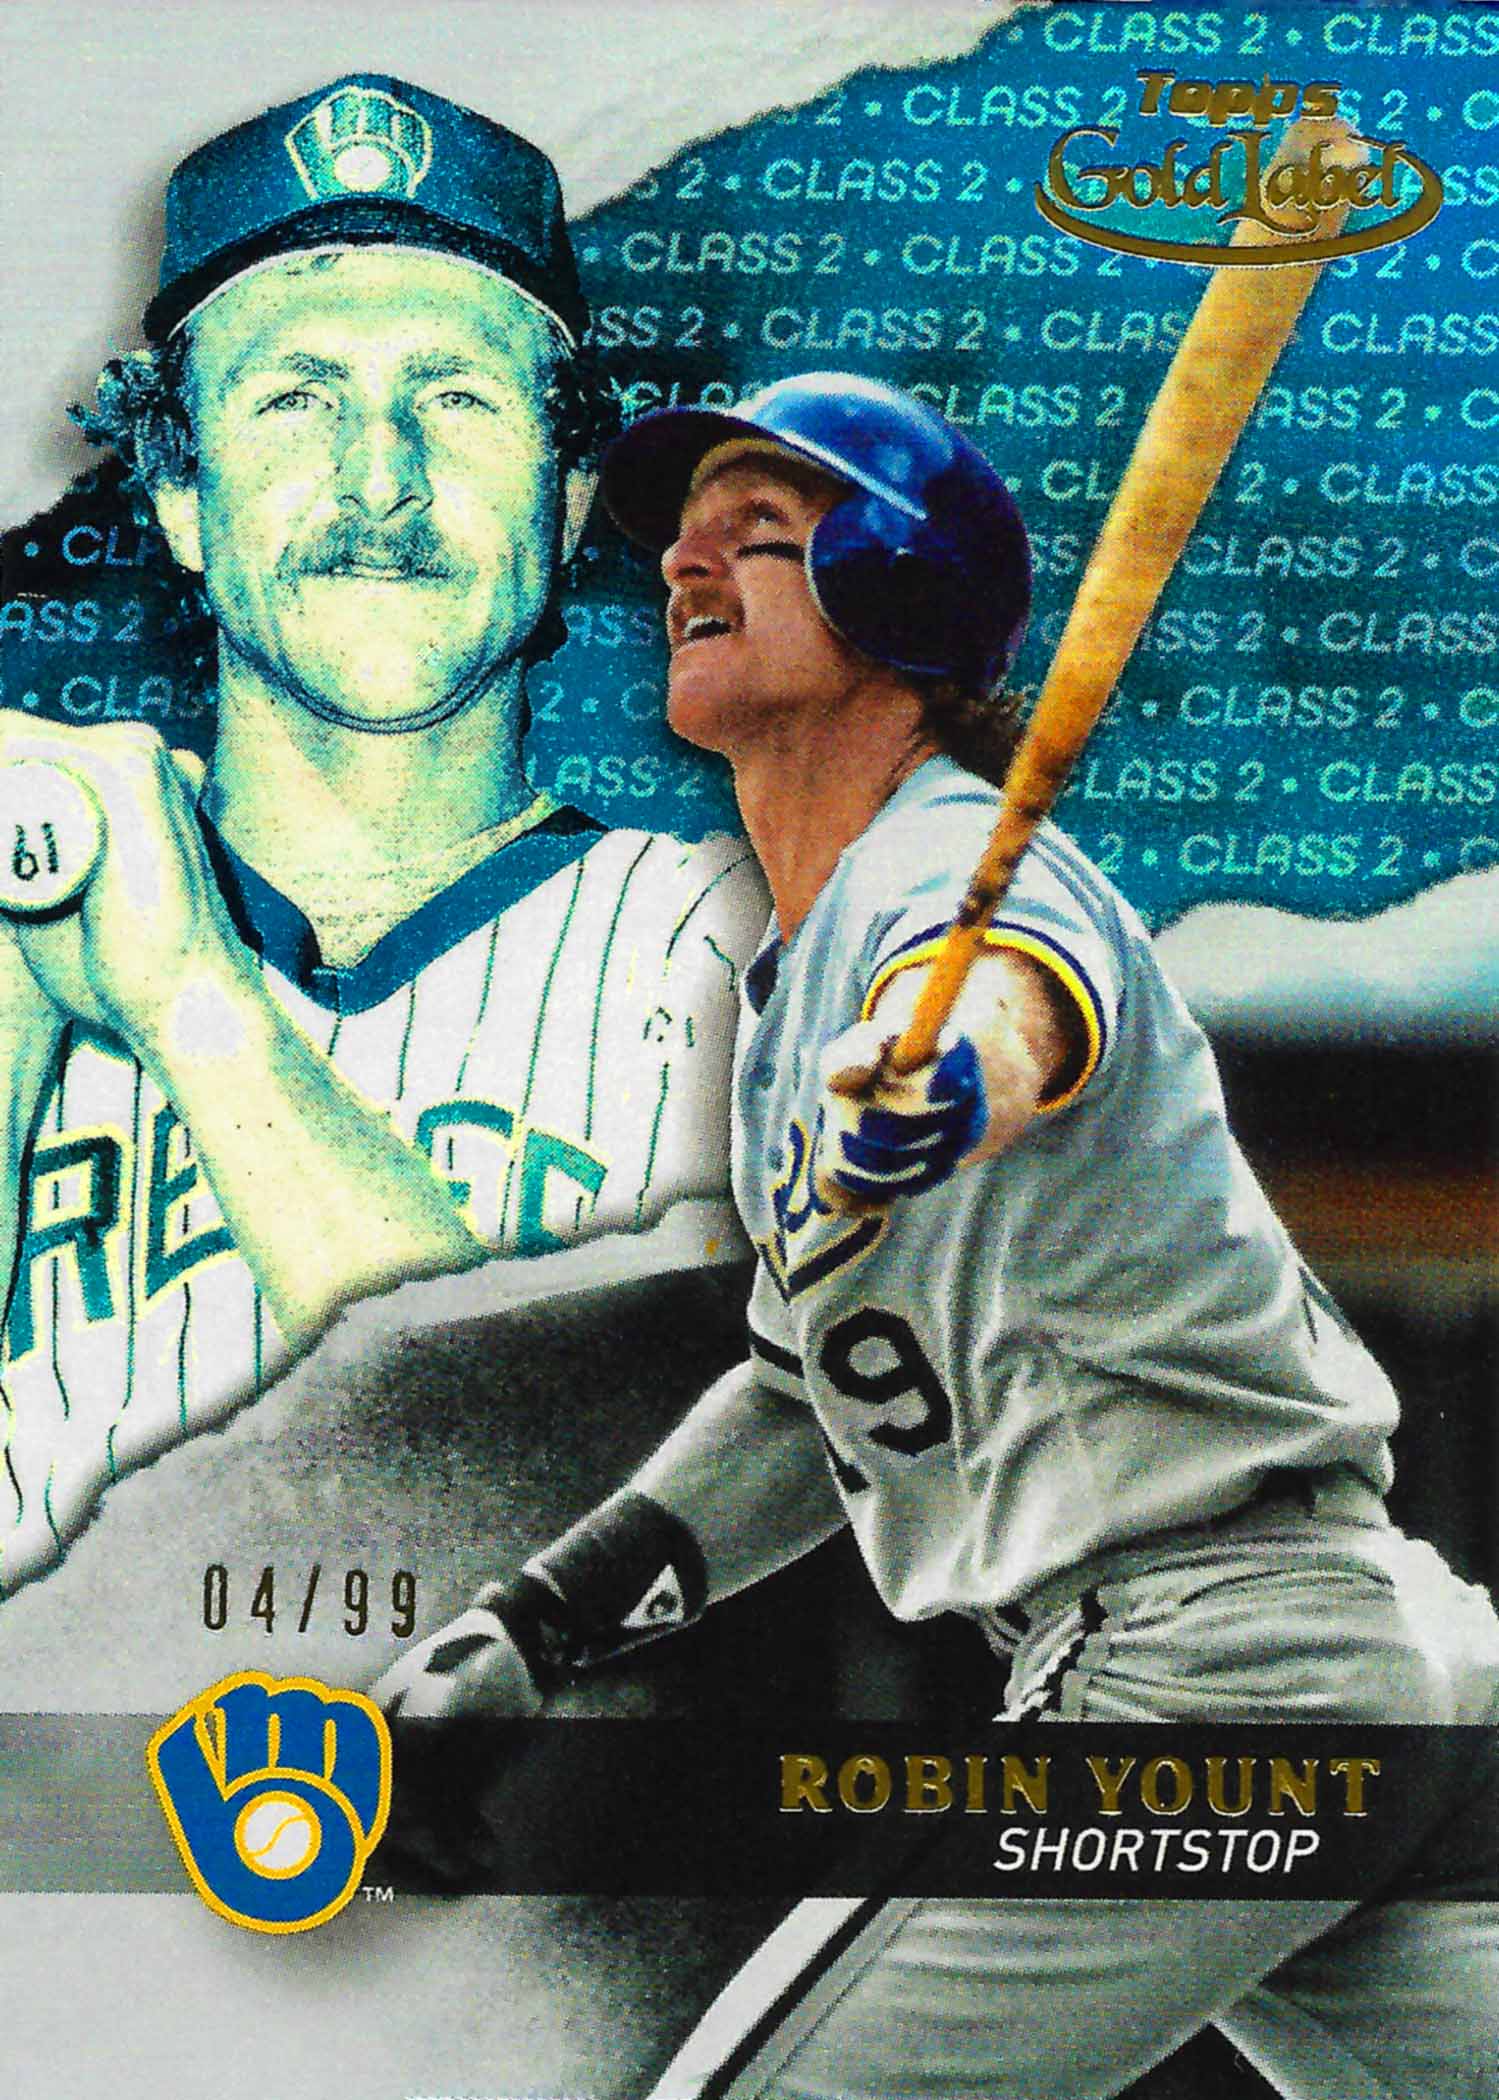 2020 Topps Gold Label Class 2 Blue